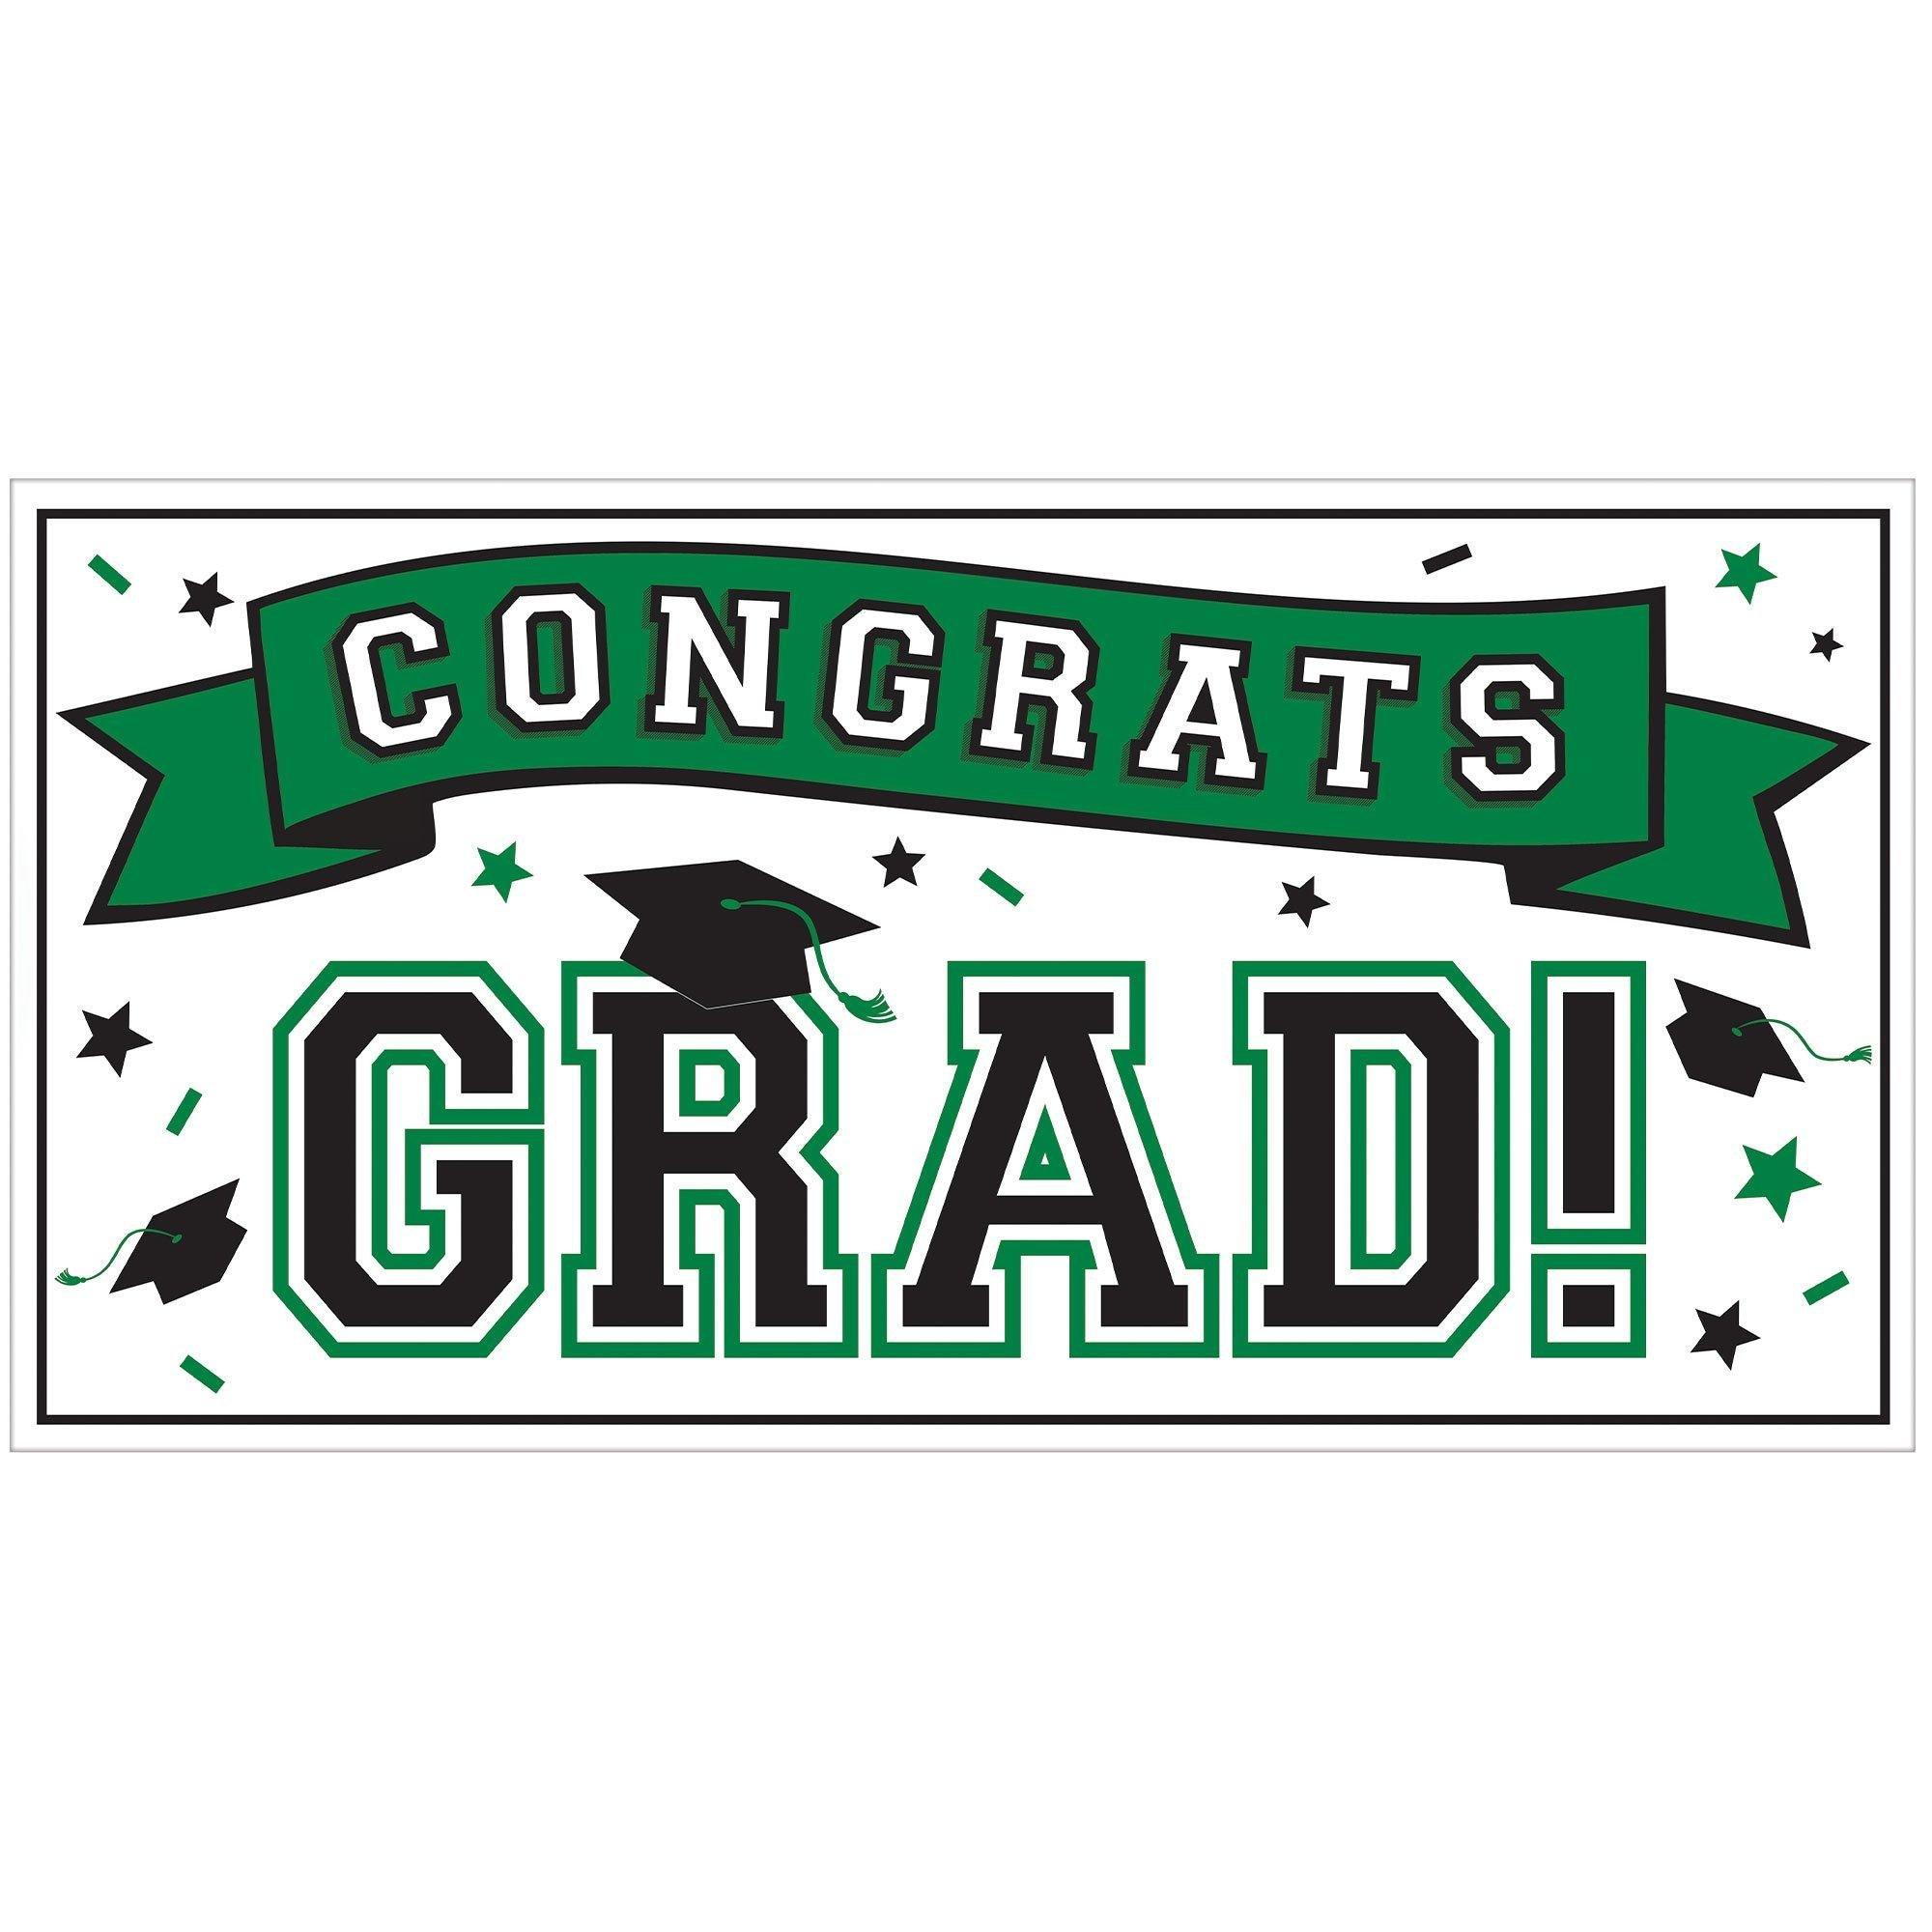 Graduation Party Supplies Kit for 80 with Decorations, Banners, Balloons, Plates, Napkins - Green Congrats Grad